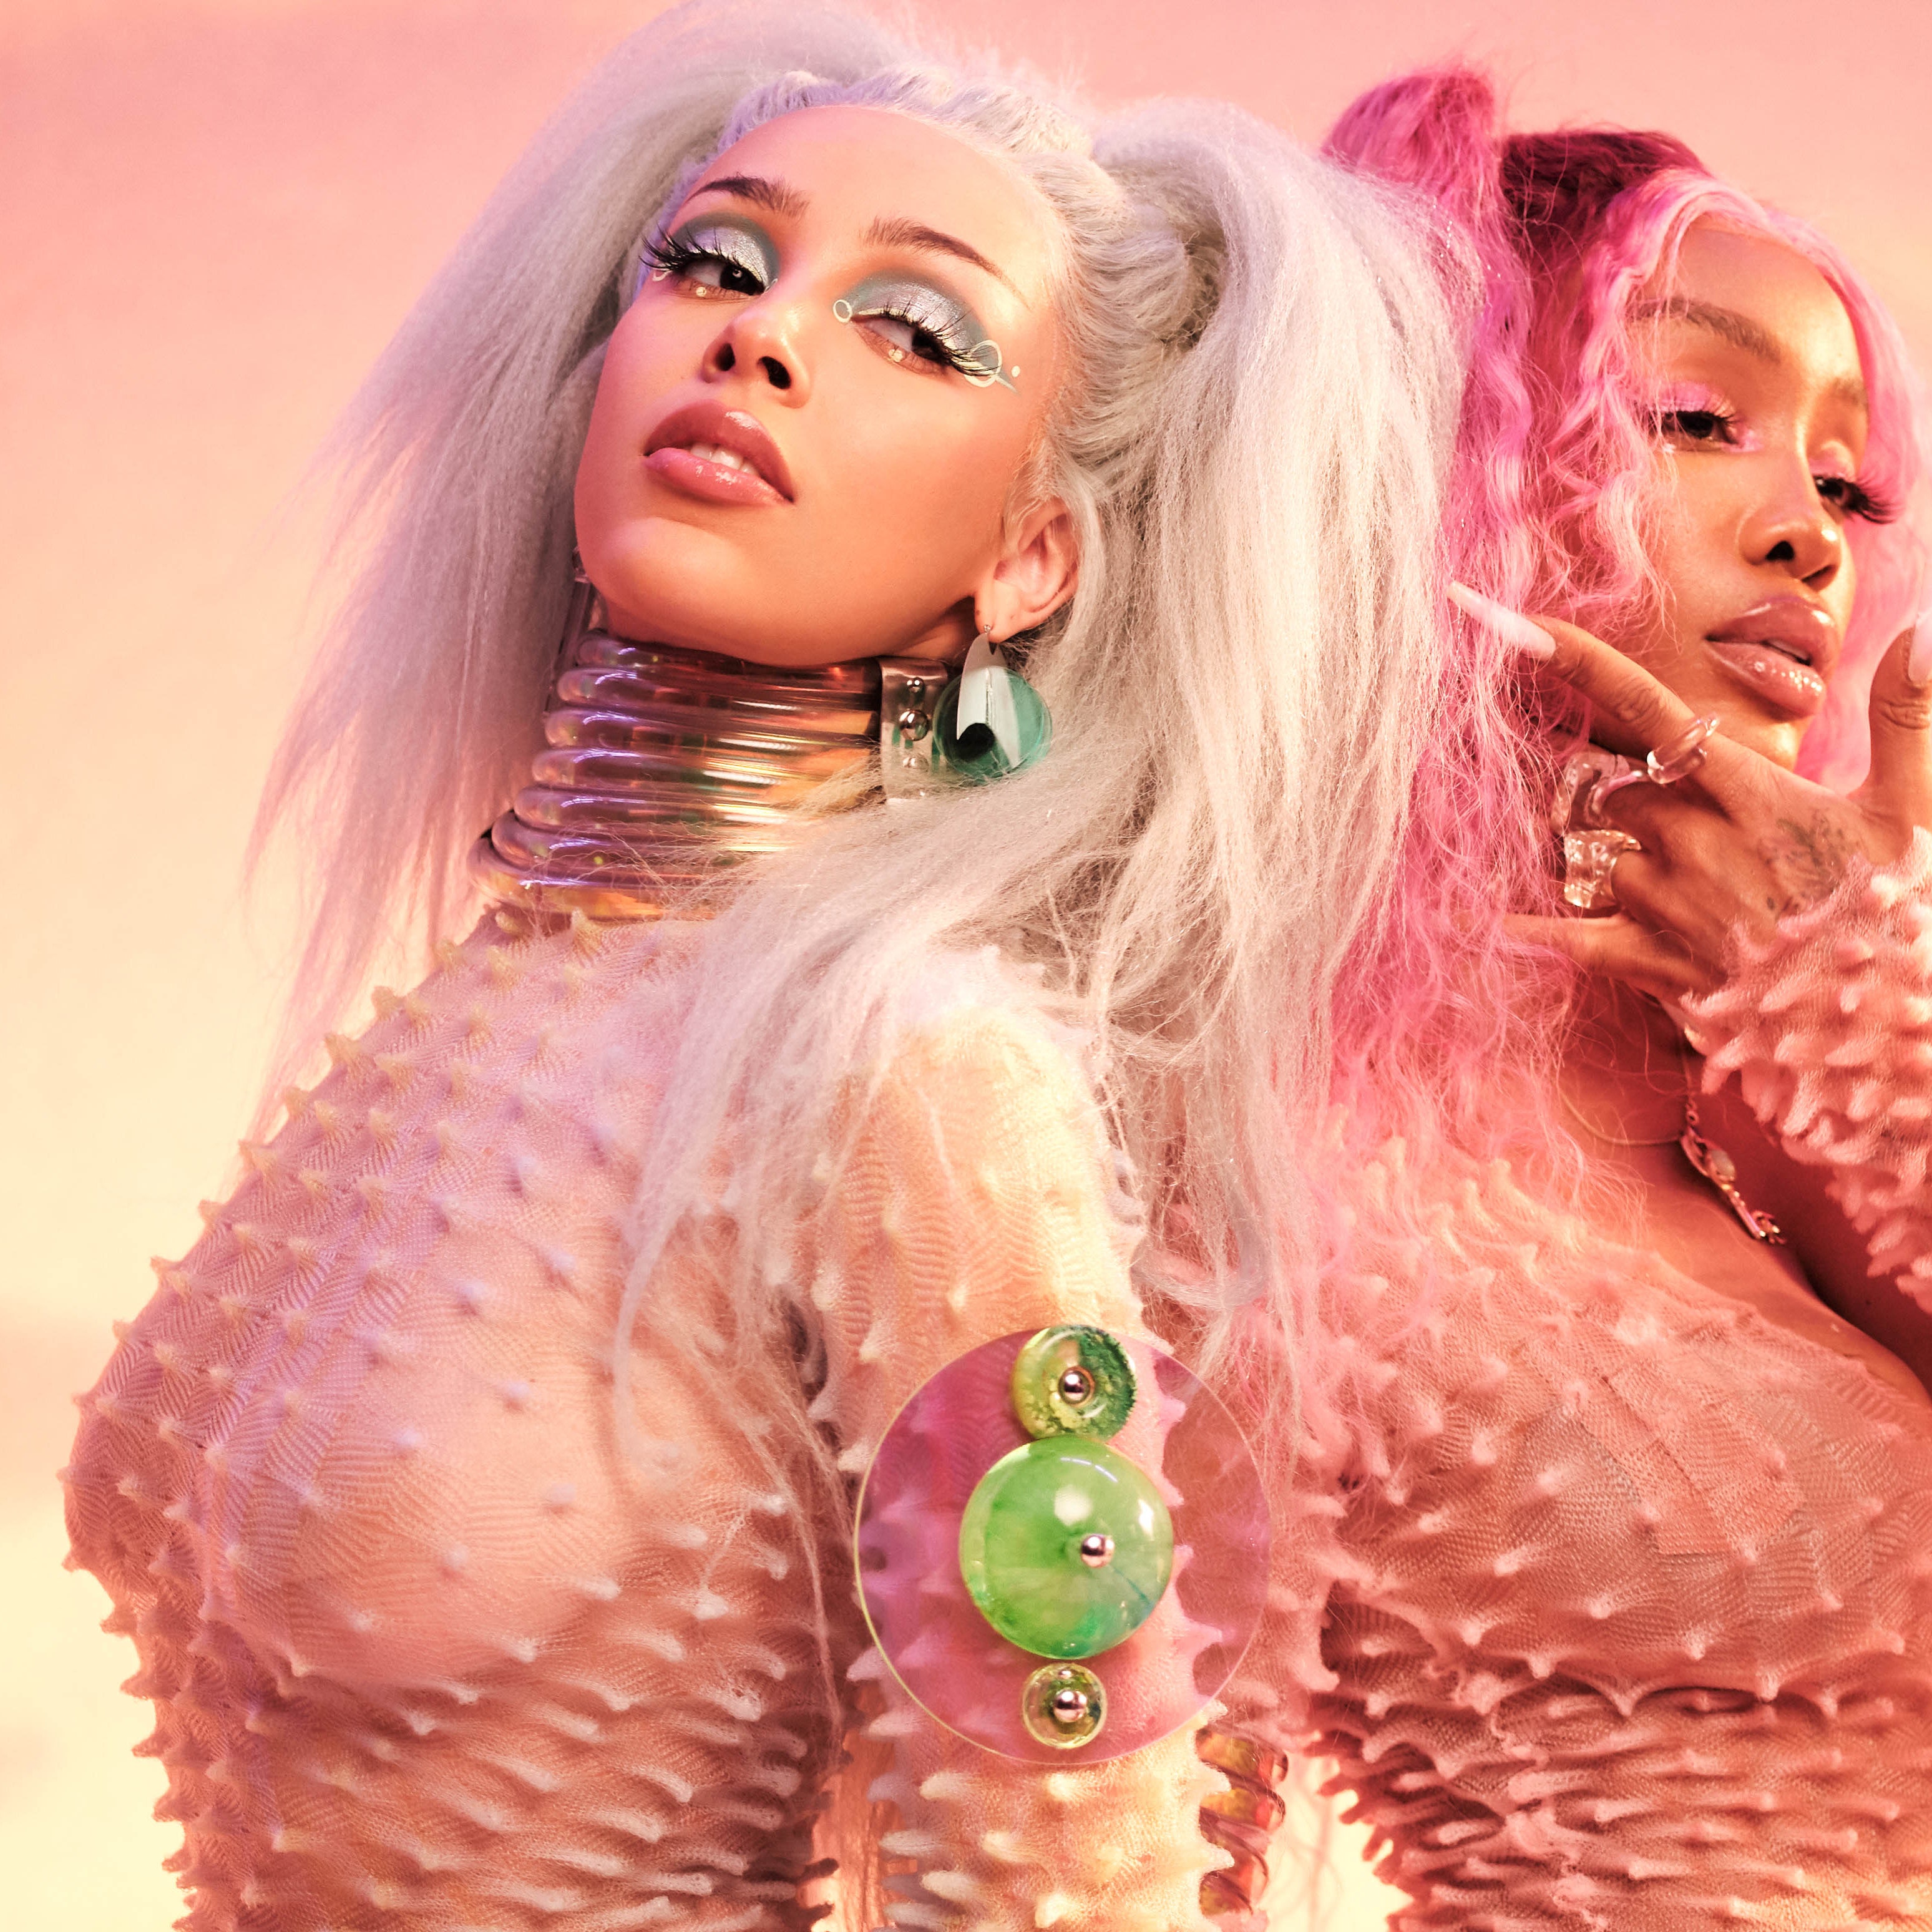 Doja Cat and SZA Share Video for New Song “Kiss Me More”: Watch